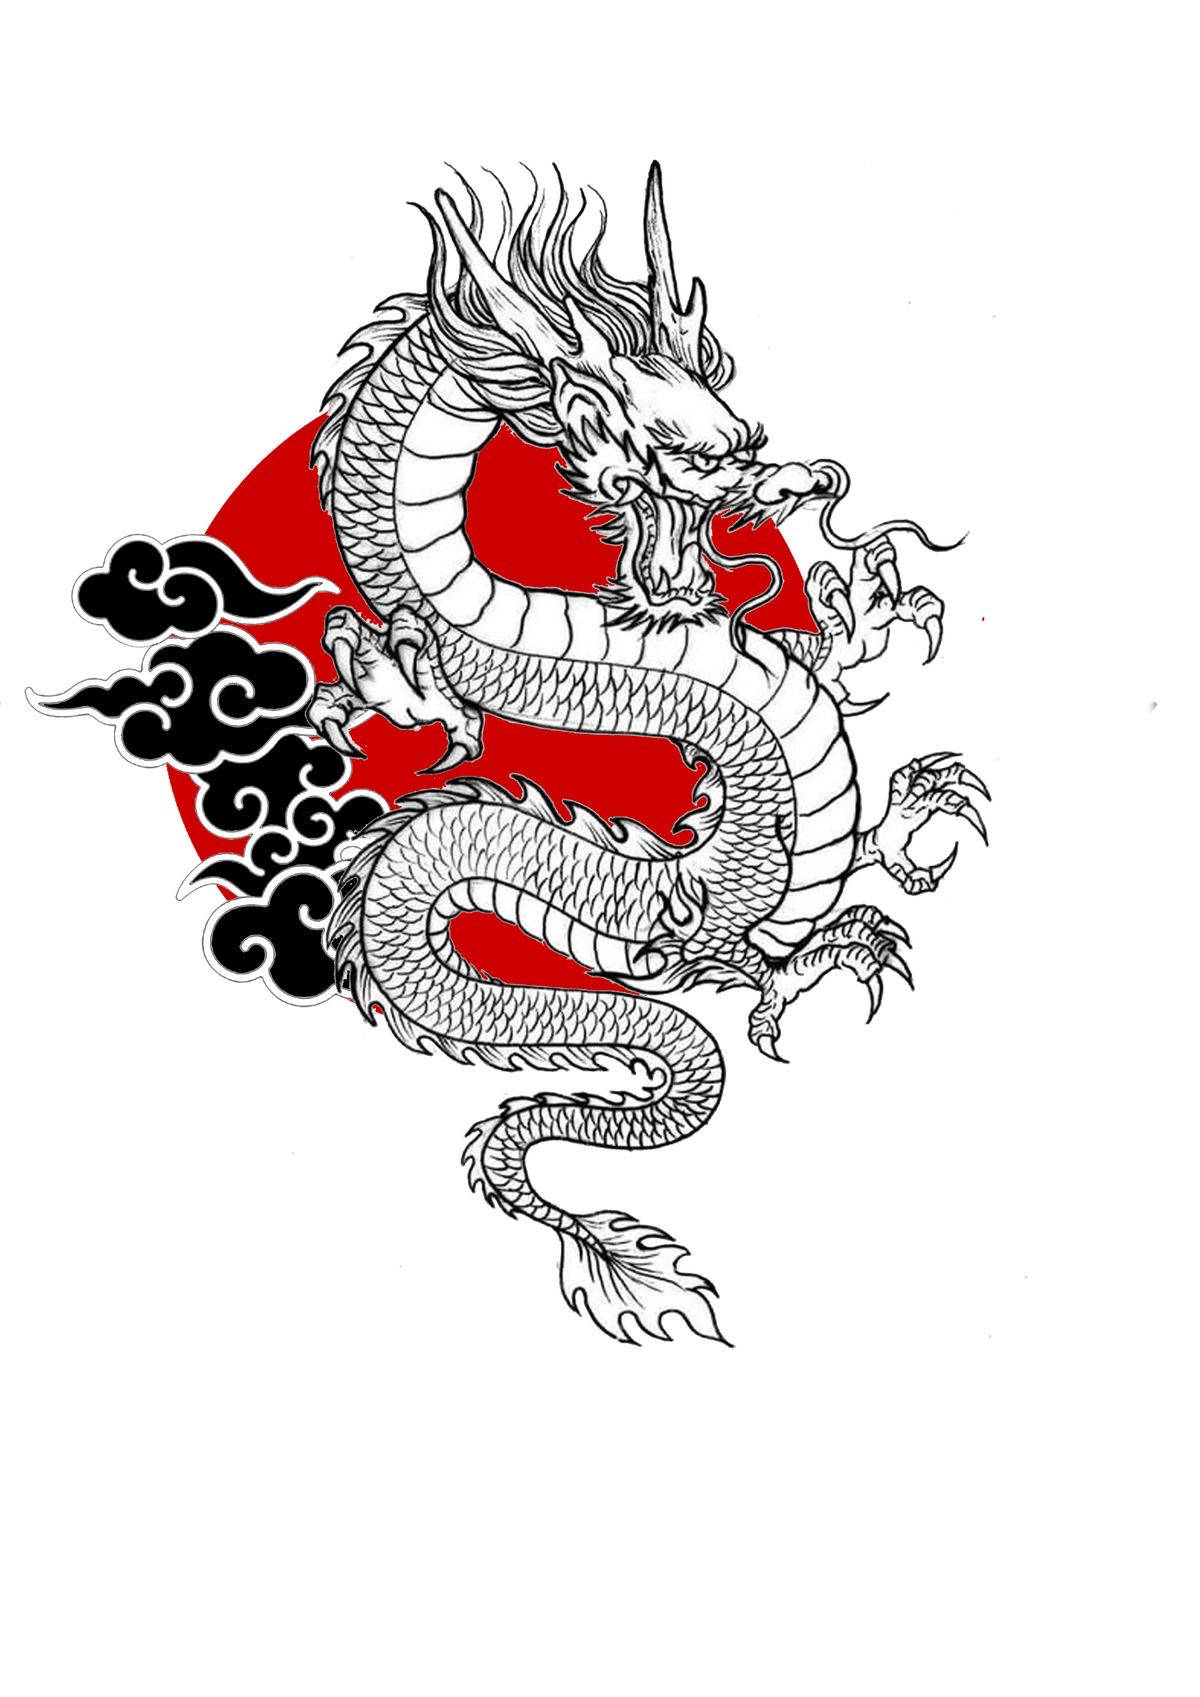 Caption: Ferocious Elegance - Majestic Japanese Dragon Tattoo In A Red Circle Background